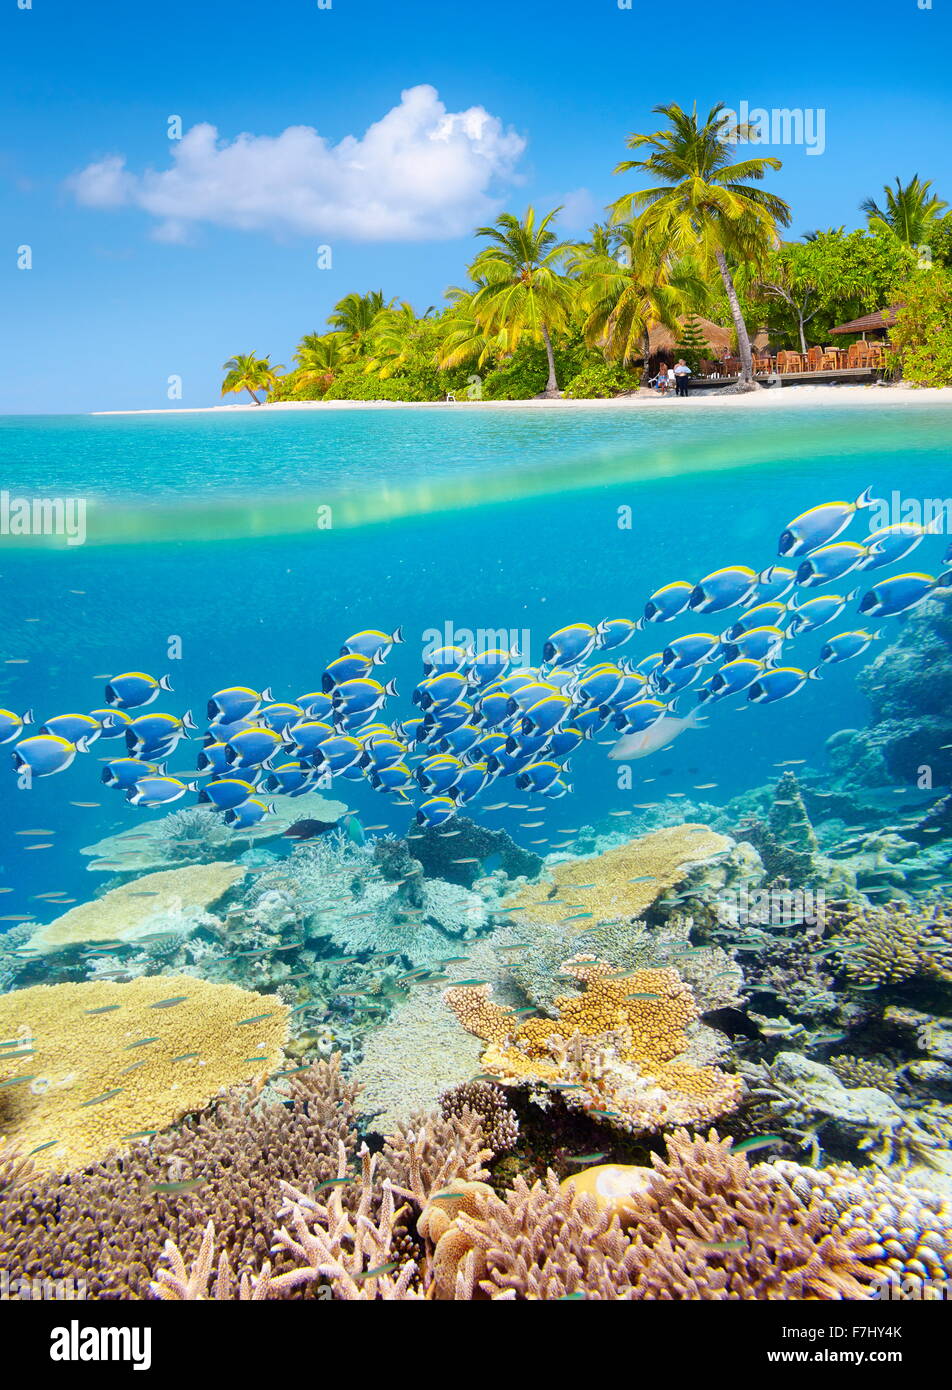 Maldives Island - tropical underwater view with reef Stock Photo